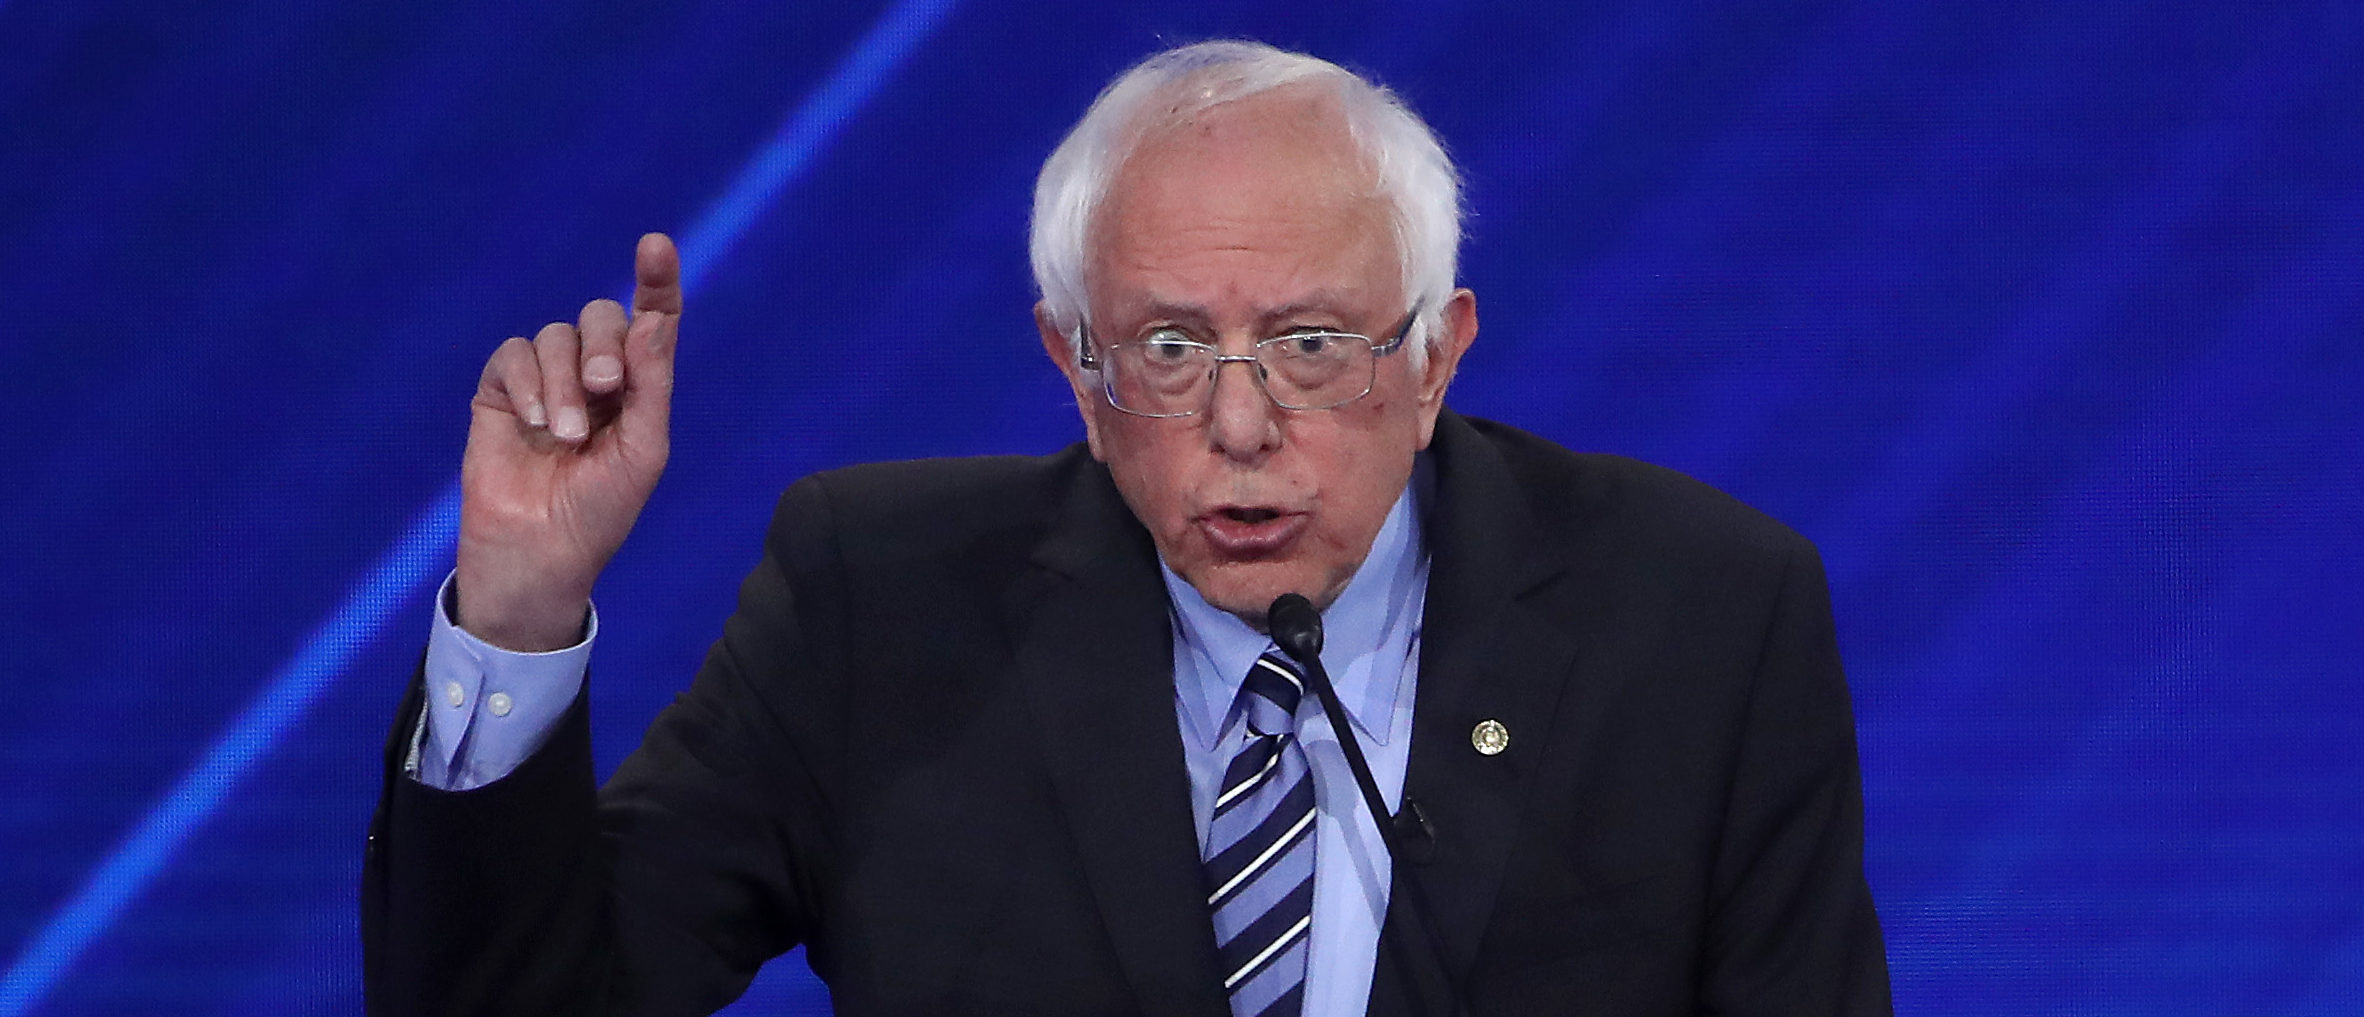 Democratic presidential candidate Sen. Bernie Sanders (I-VT) speaks during the Democratic Presidential Debate at Texas Southern University's Health and PE Center on September 12, 2019 in Houston, Texas. (Win McNamee/Getty Images)